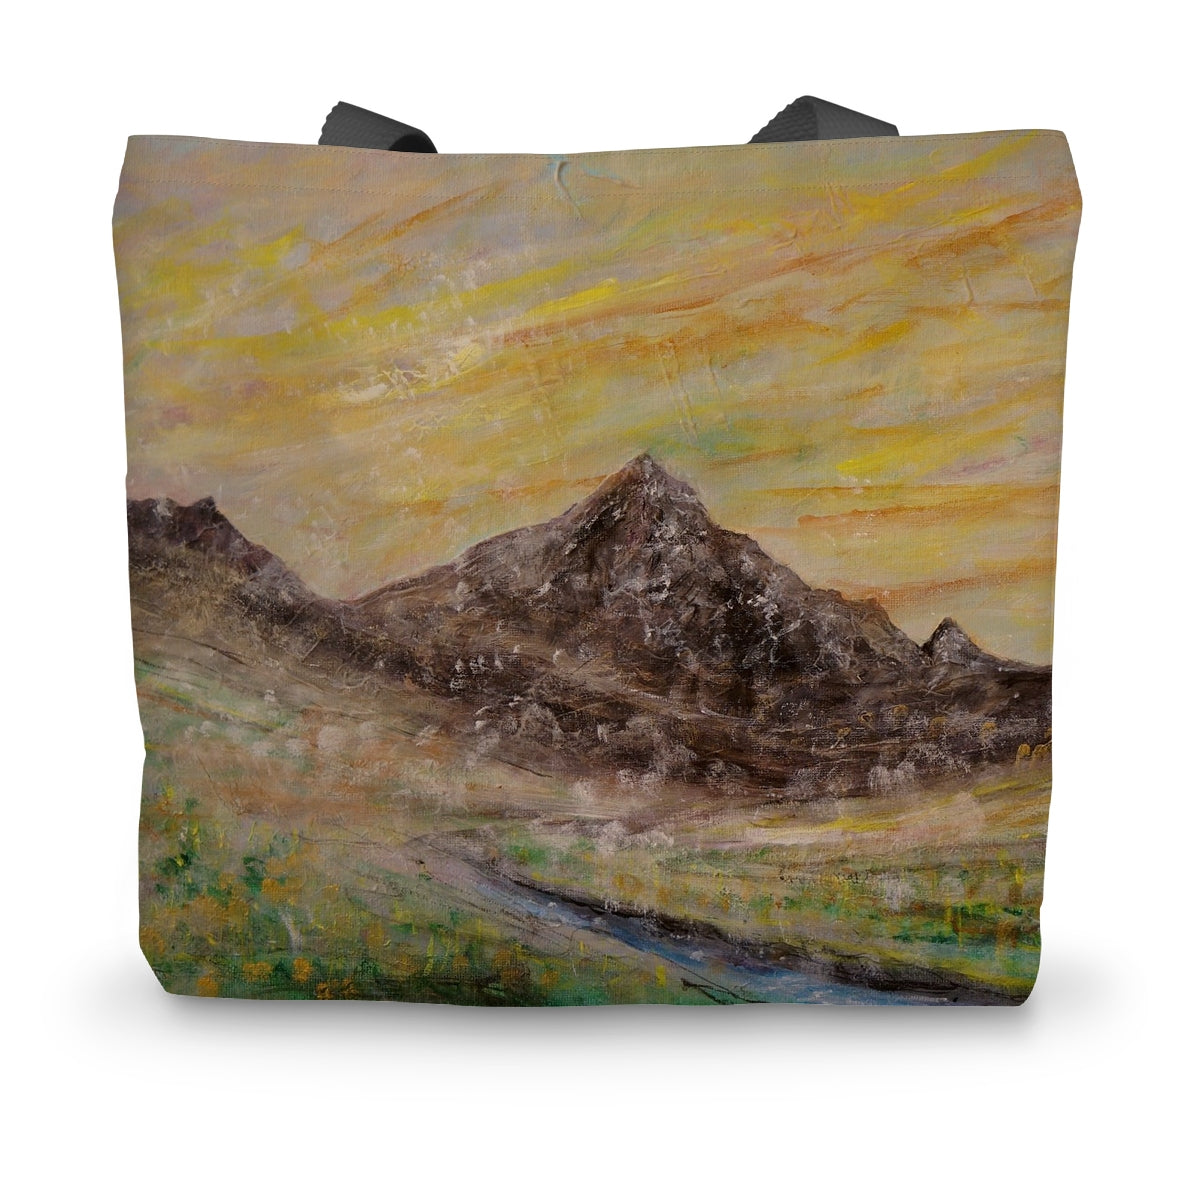 Glen Rosa Mist Arran Art Gifts Canvas Tote Bag-Bags-Arran Art Gallery-14"x18.5"-Paintings, Prints, Homeware, Art Gifts From Scotland By Scottish Artist Kevin Hunter